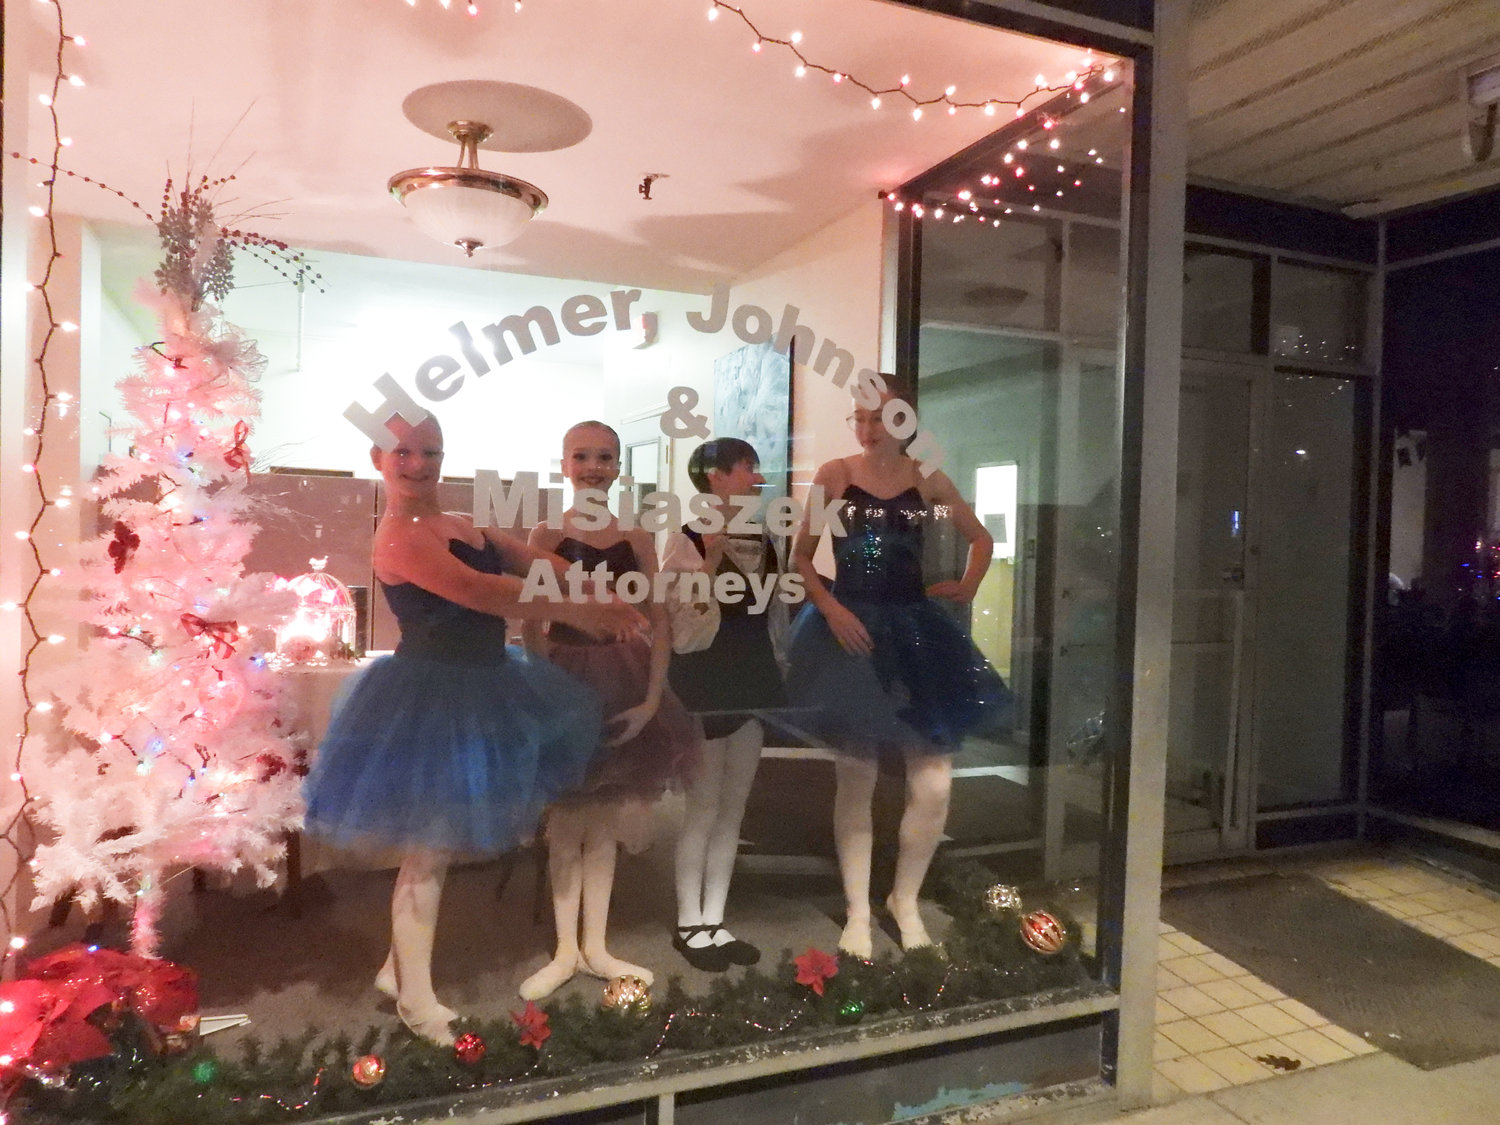 The city of Oneida welcomed in the holiday season with its second annual Parade of Lights, annual tree lighting, and a visit from Santa Claus. Stores and businesses across Oneida were decorated, and members of the Bogardus Performing Arts Center took stage as living window displays.